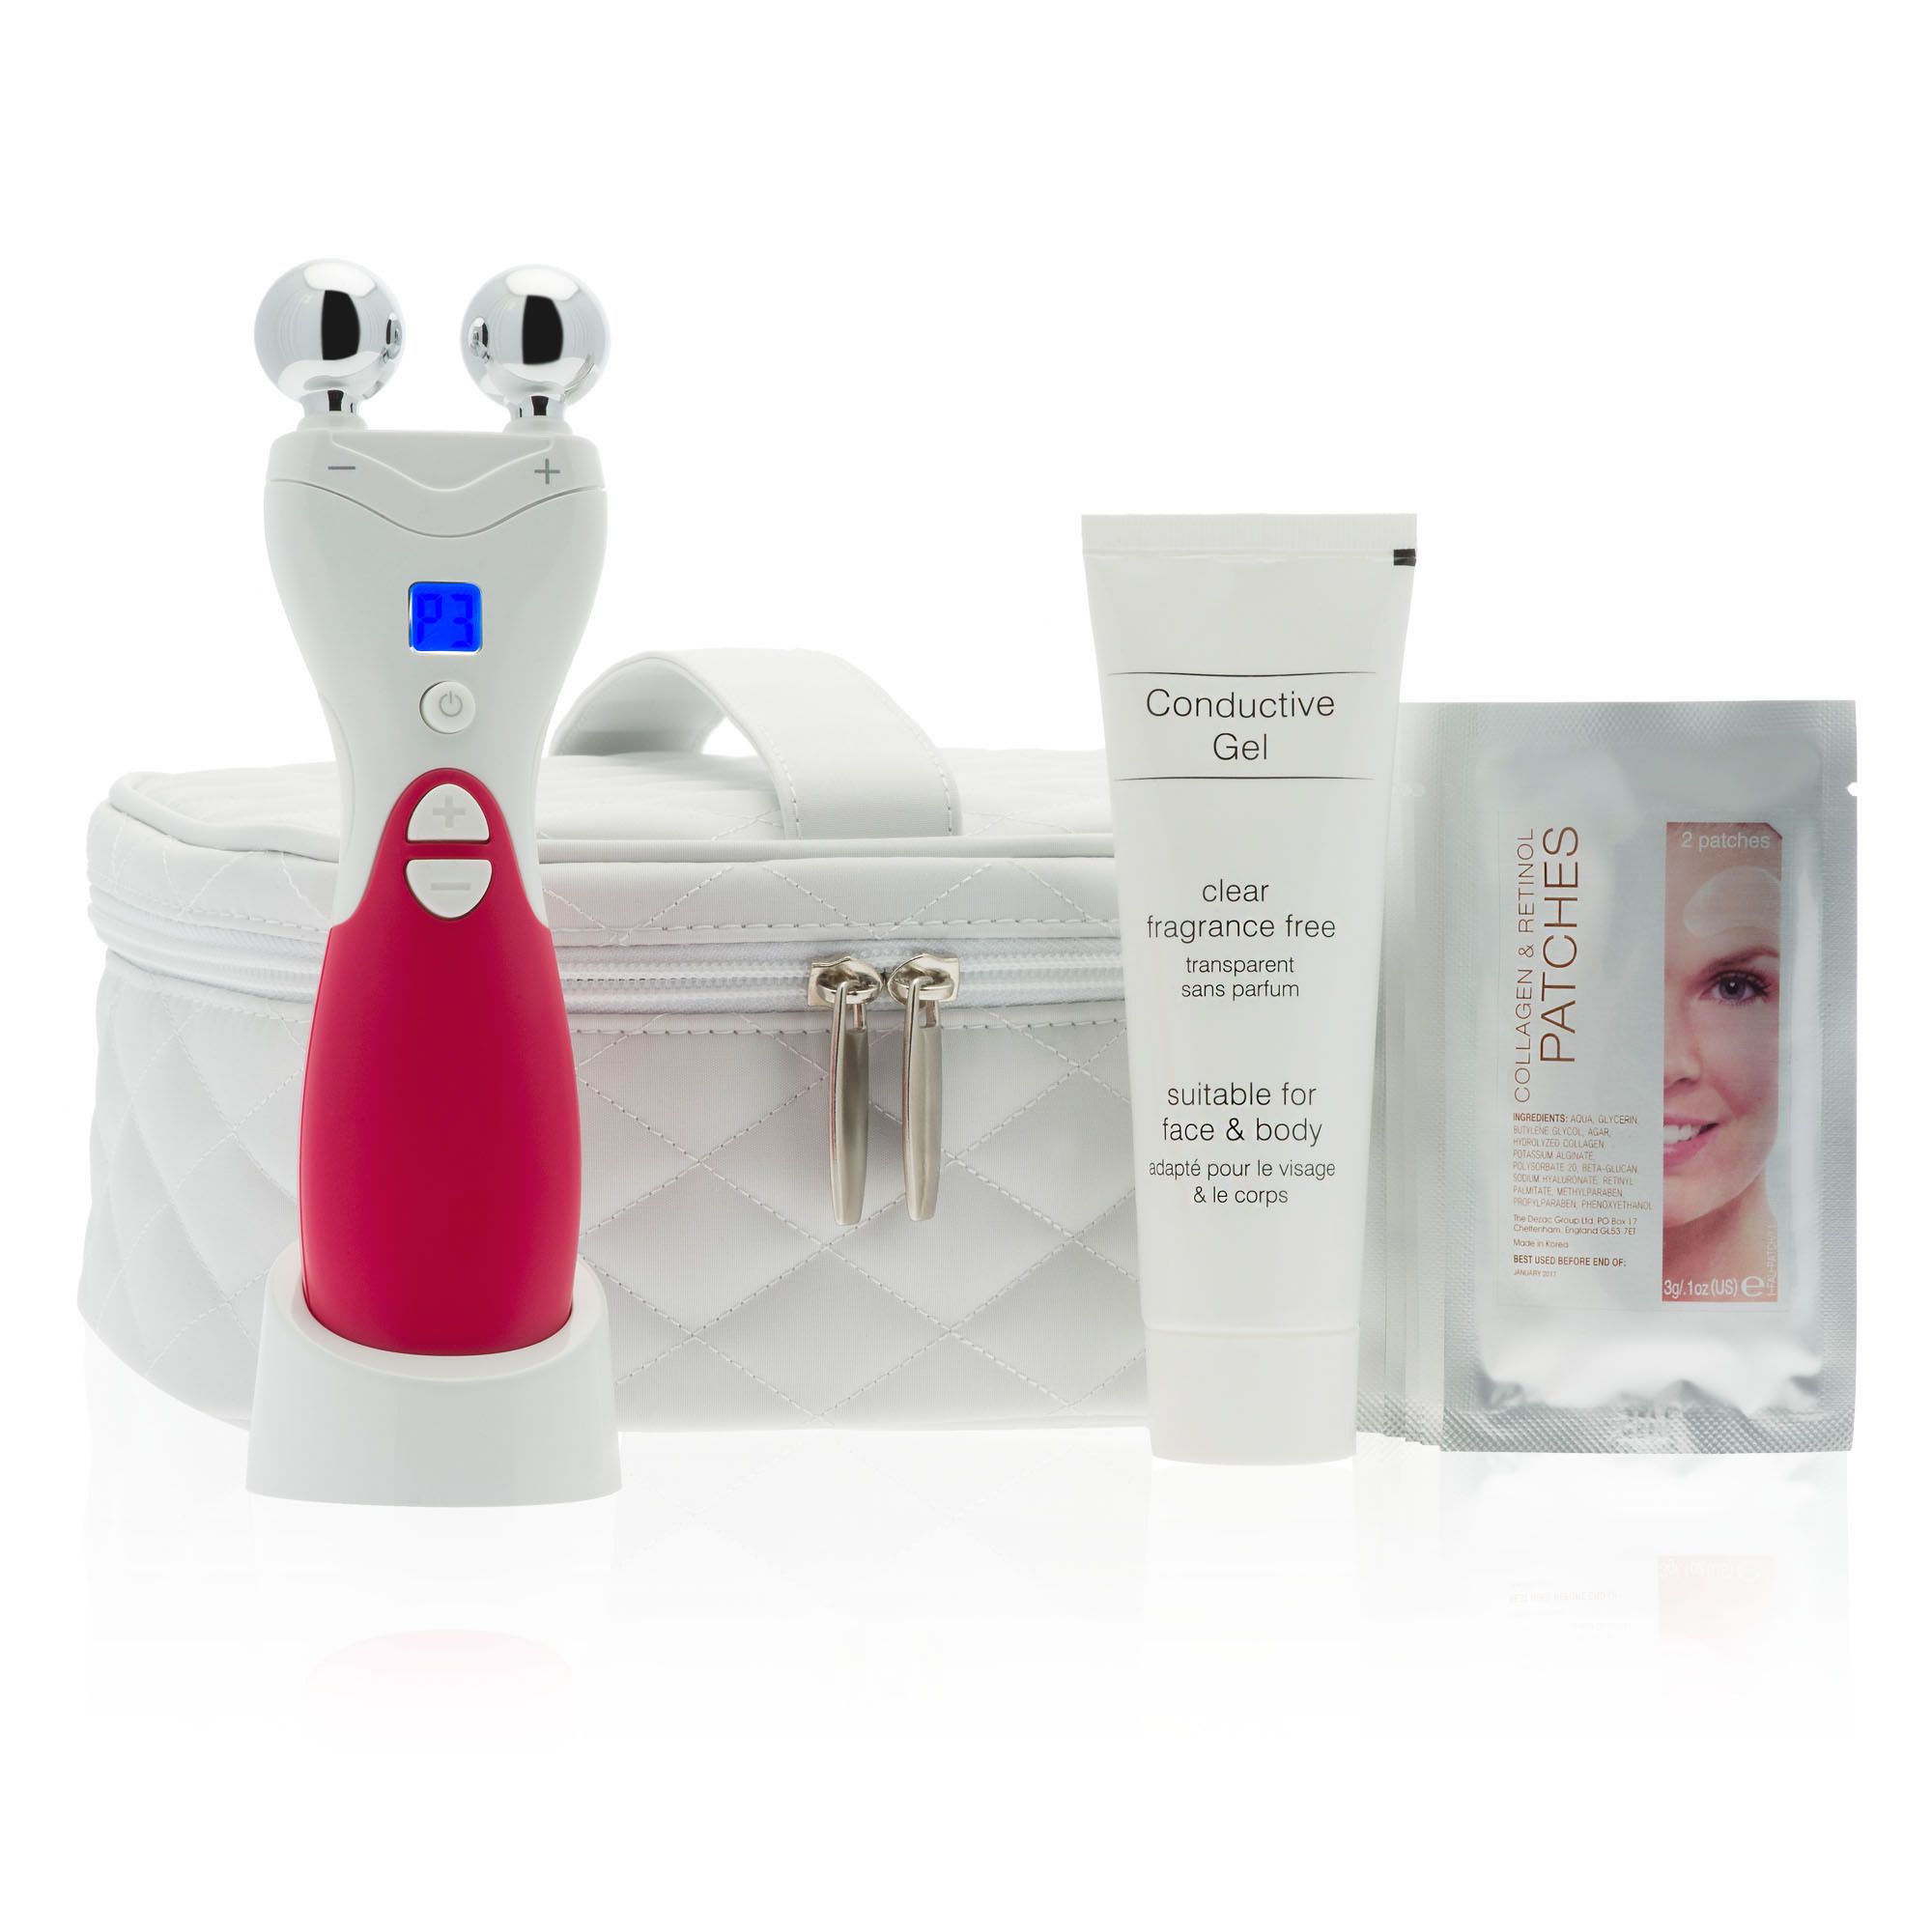 Image of 60 Second Face Lift Beauty tool + 10 patch